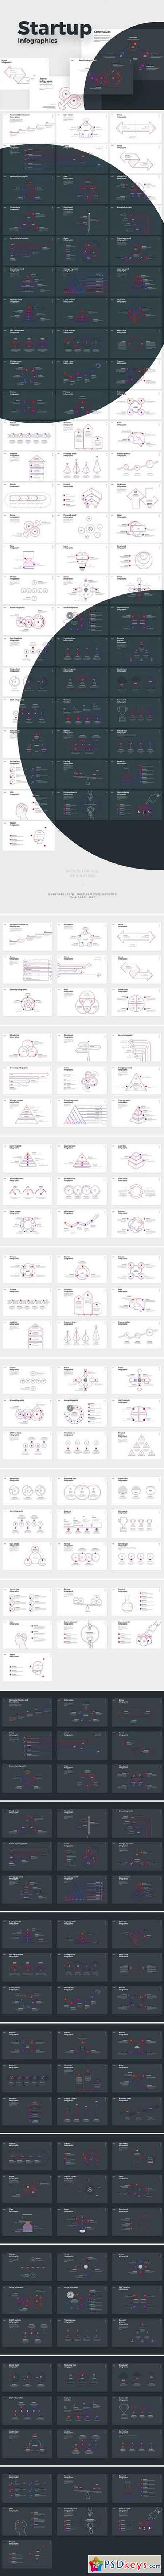 STARTUP powerpoint infographics 1797533